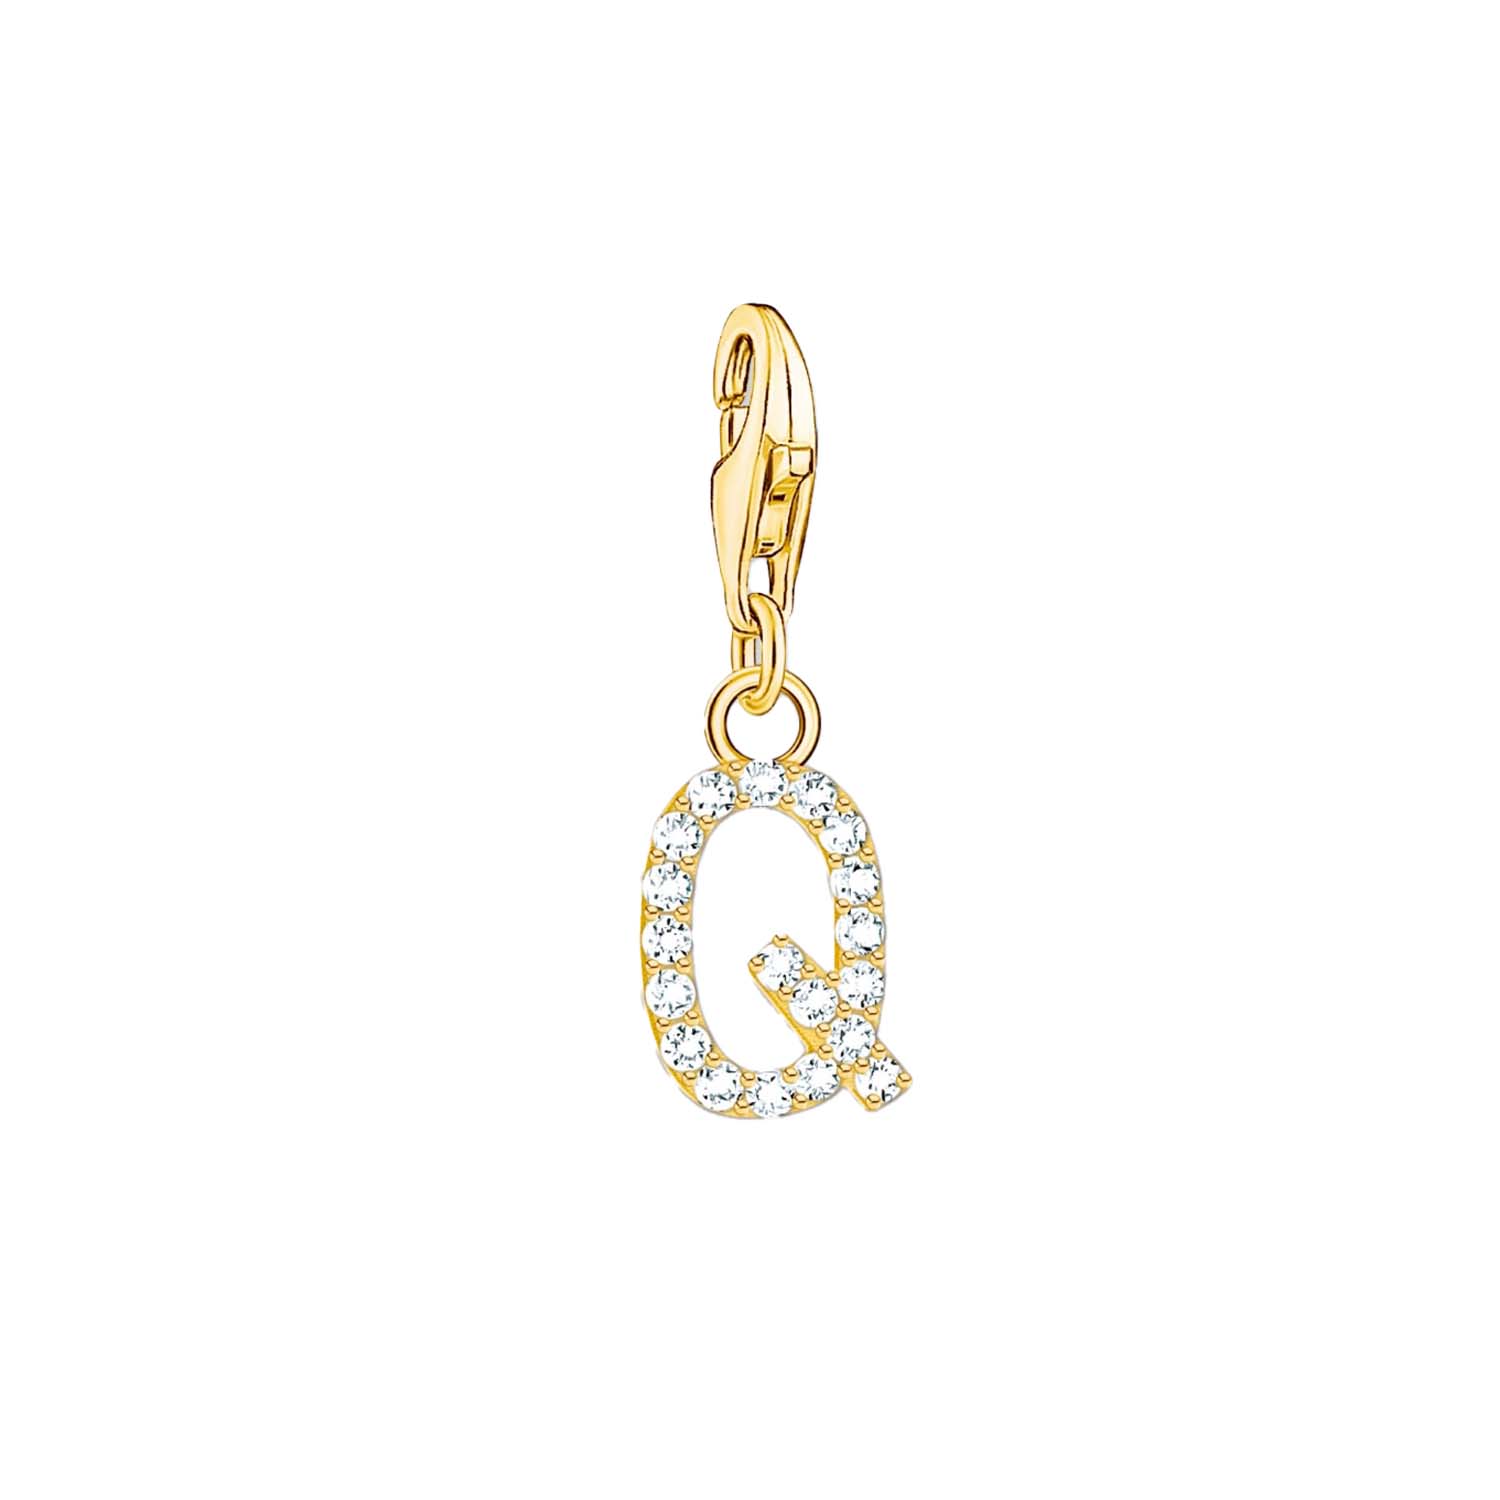 Thomas Sabo Charmista Gold Plated Sterling Silver Letter Q Charm Pendant